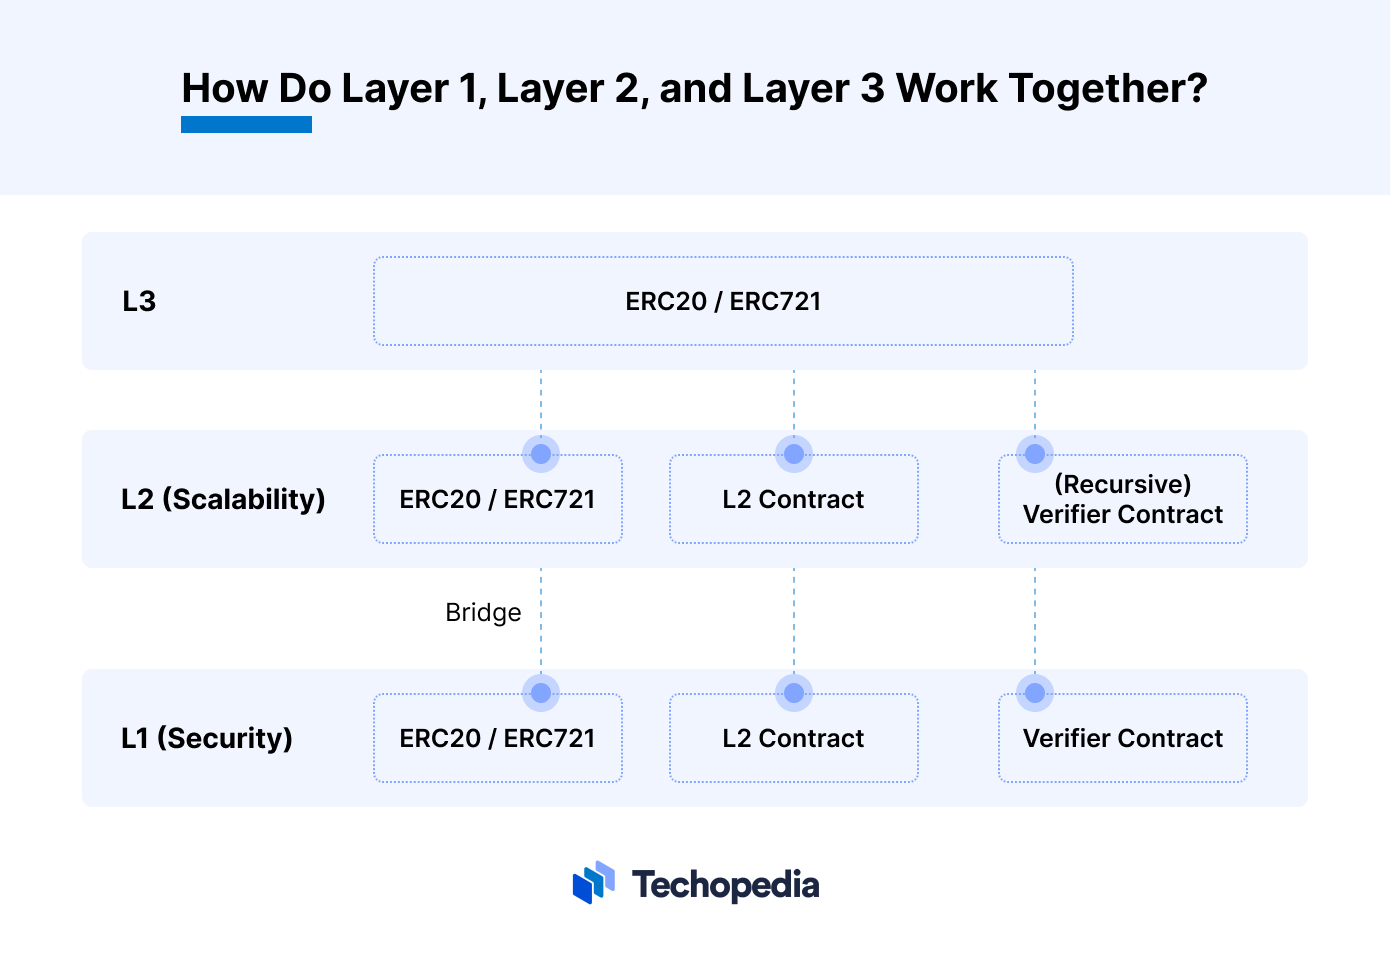 How Do Layer 1, Layer 2 and Layer 3 Work Together?